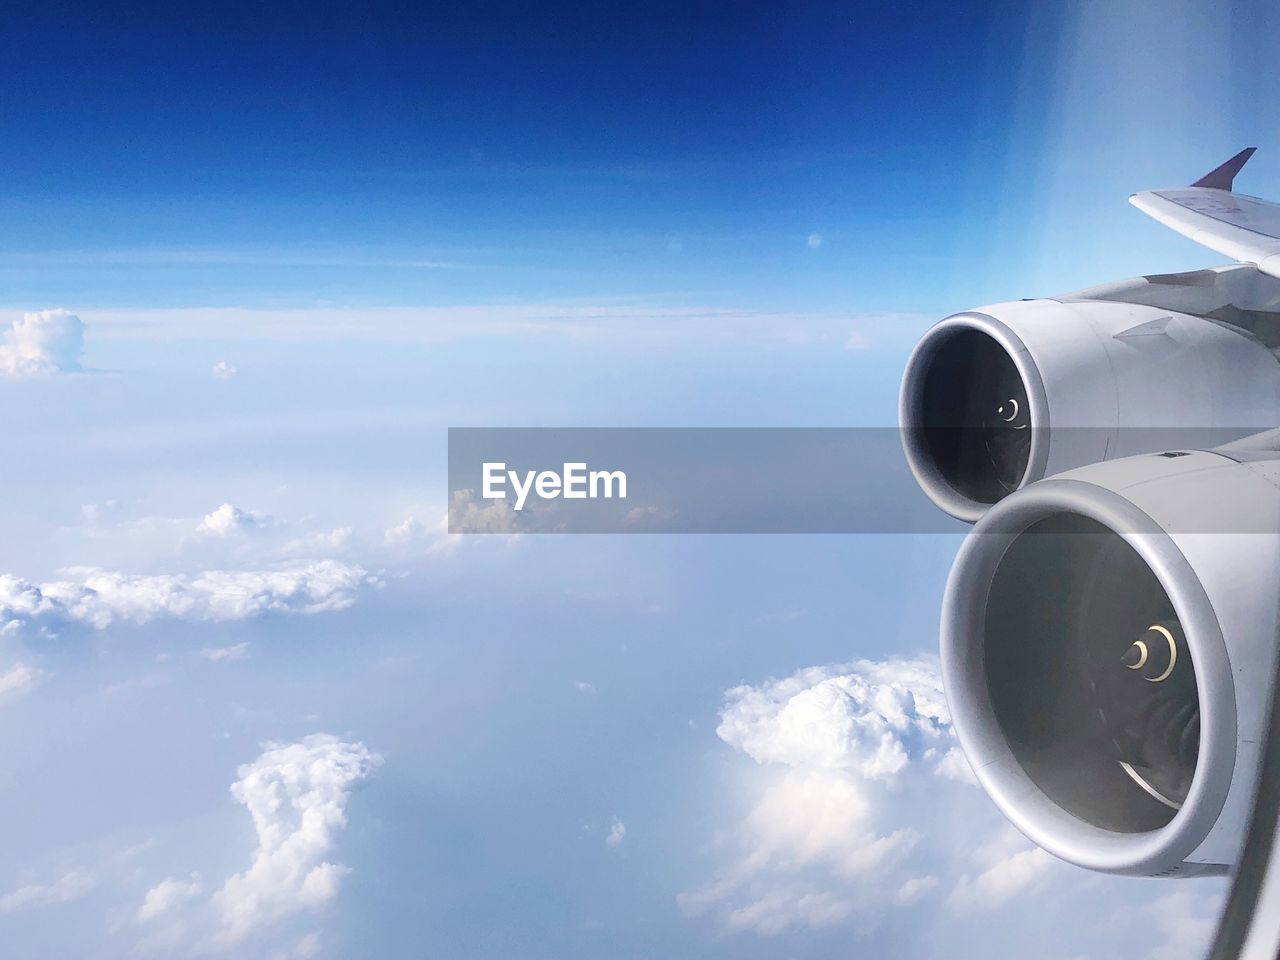 Cropped image of airplane flying over clouds seen through window